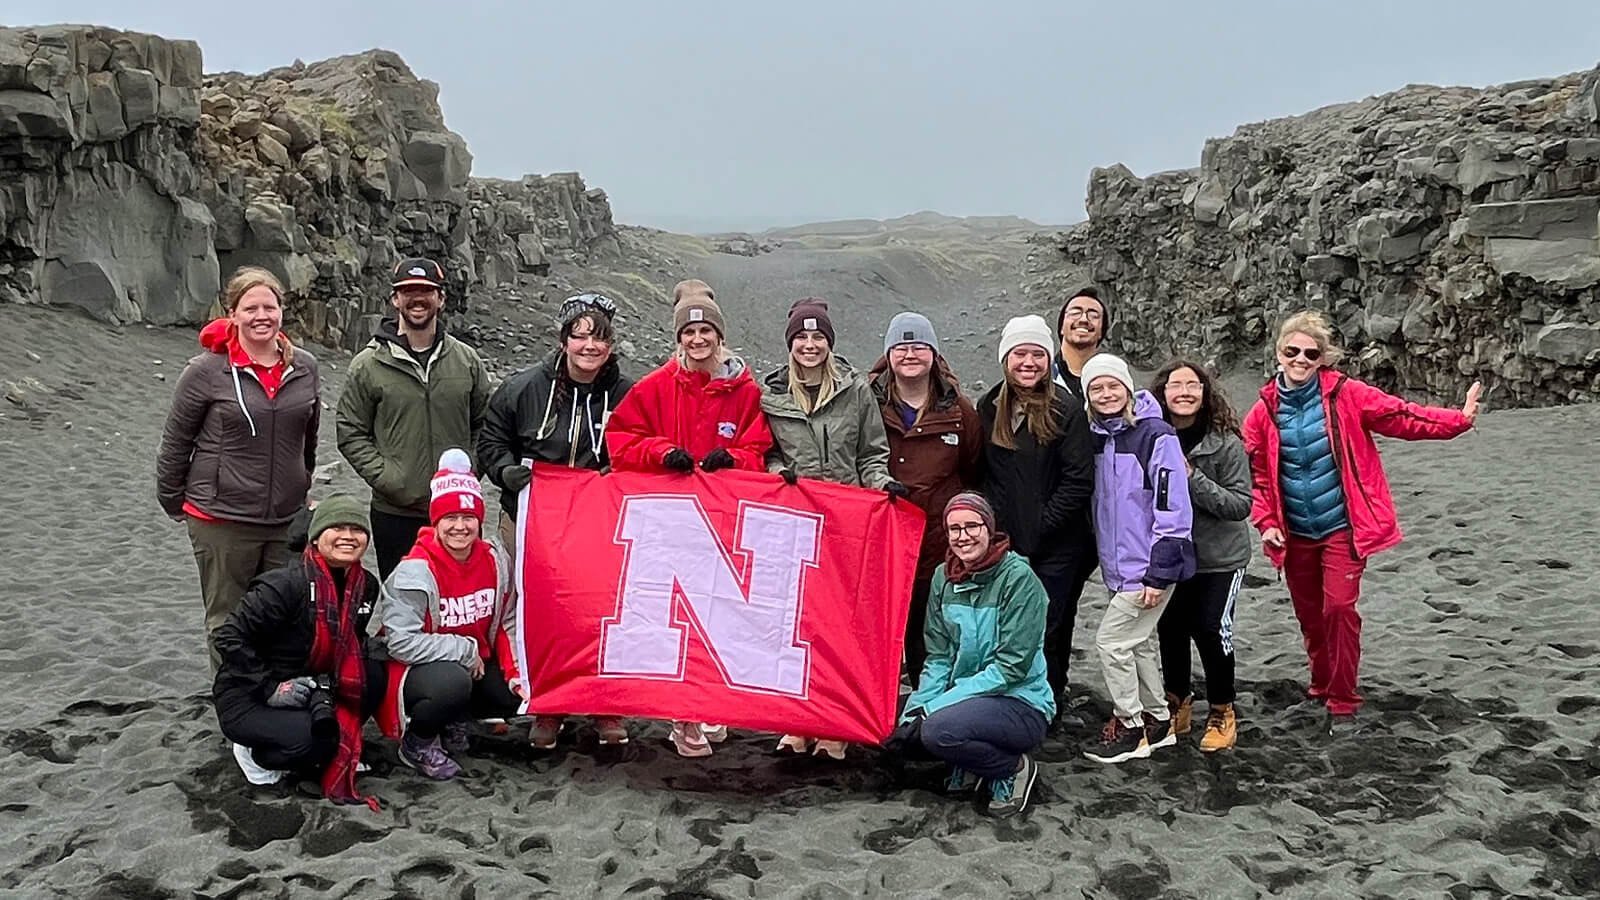 A group of students hold up a red Nebraska flag on rocky terrain